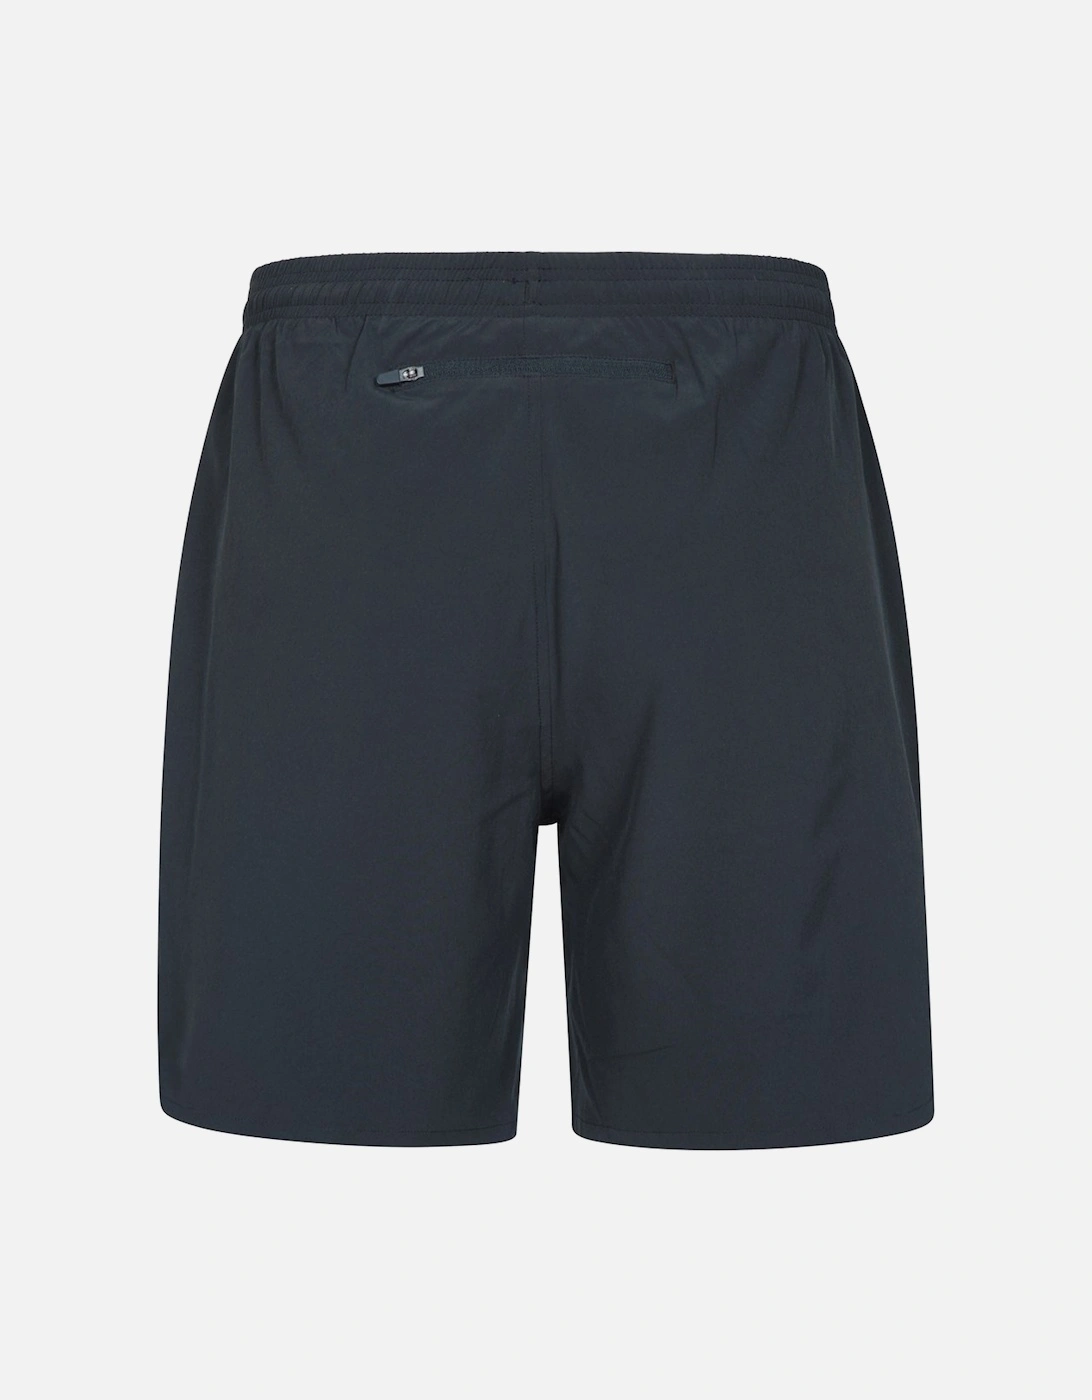 Mens Motion 2 in 1 Shorts